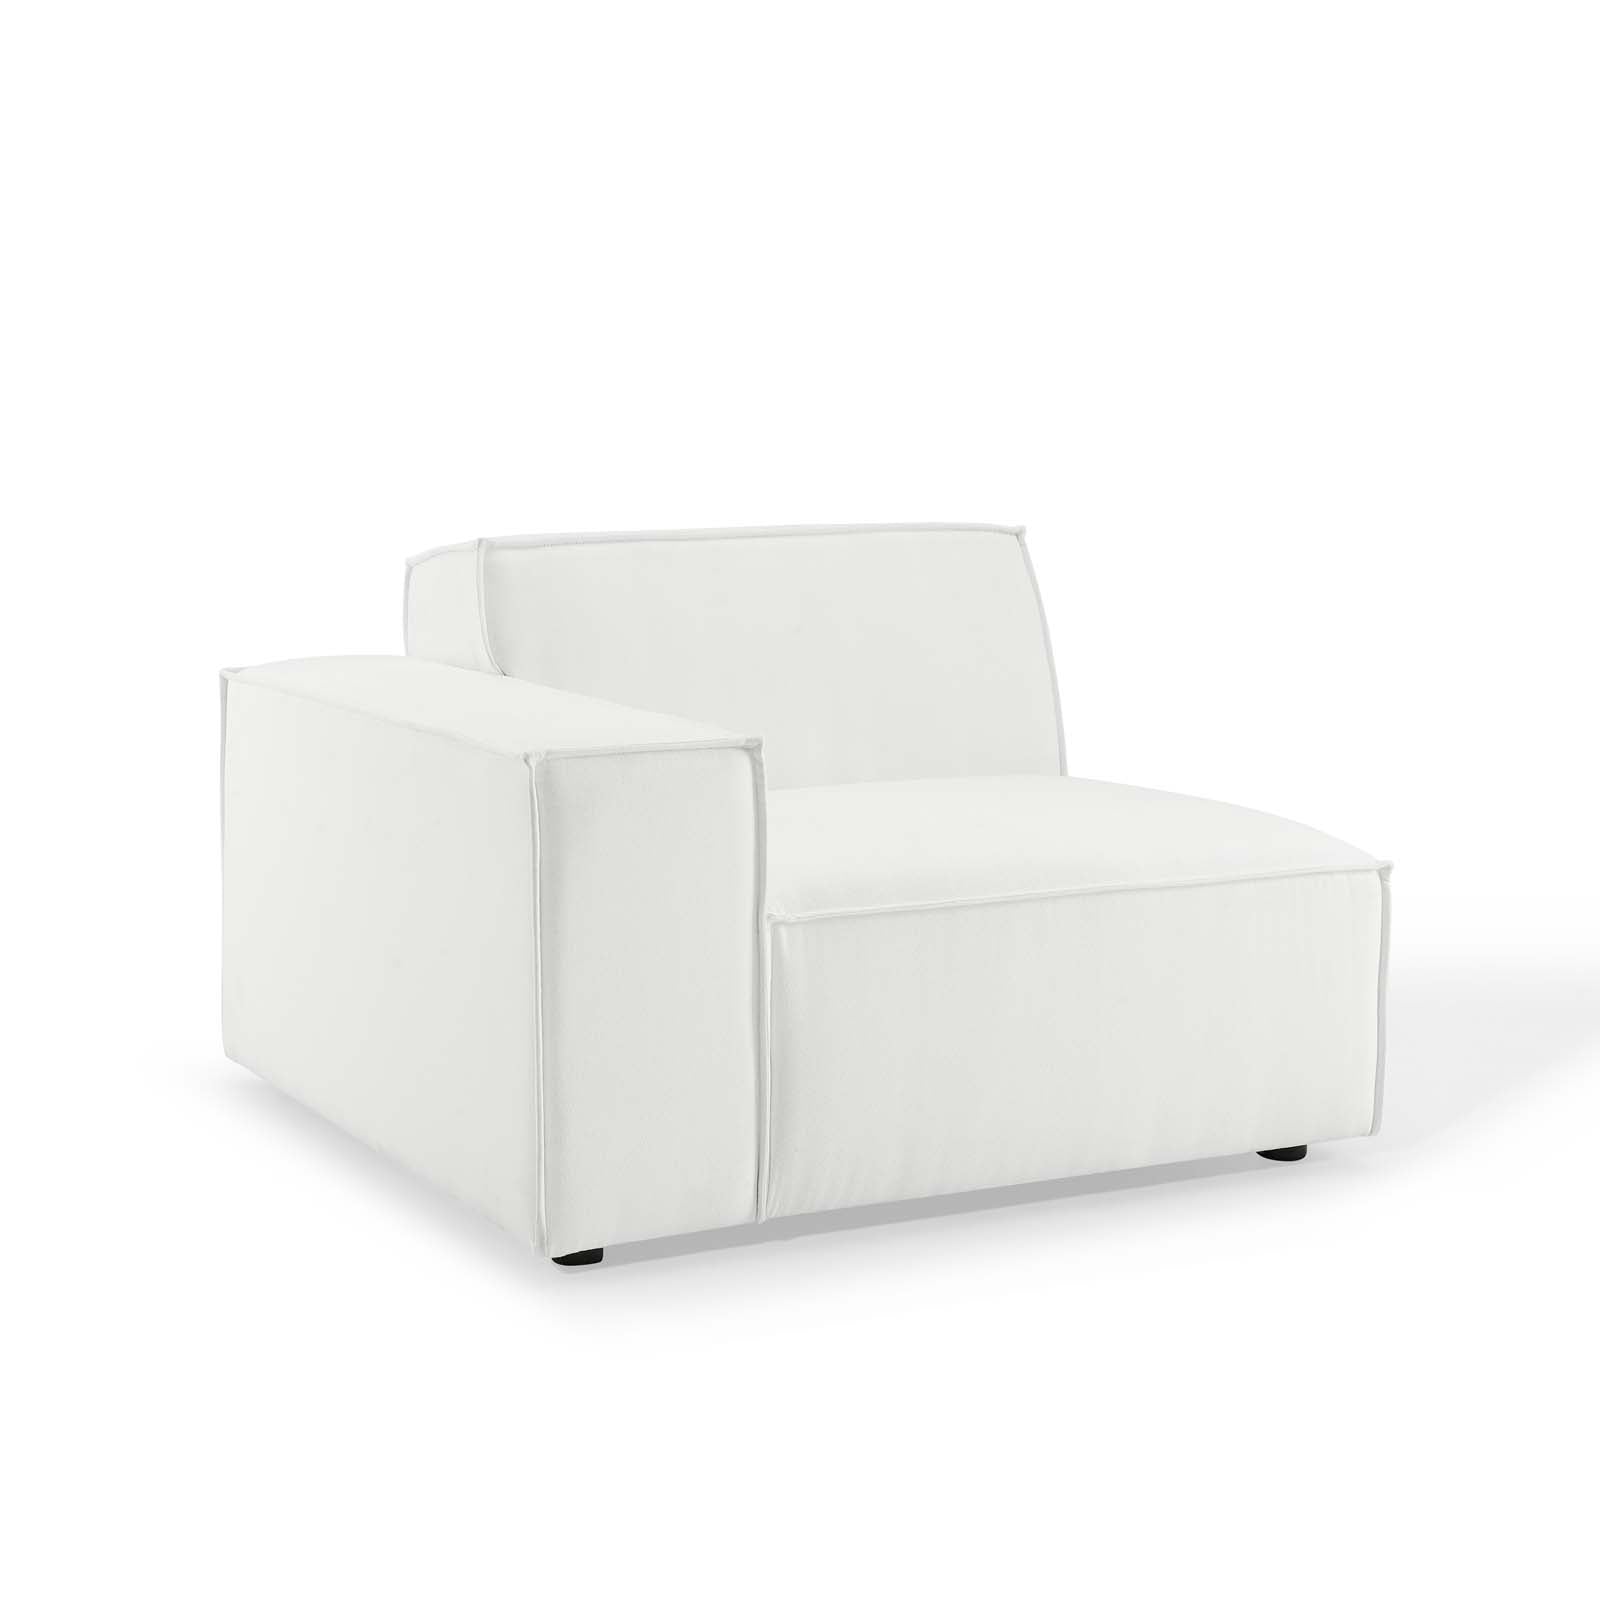 Modway Sectional Sofas - Restore 5-Piece Sectional Sofa White 164"